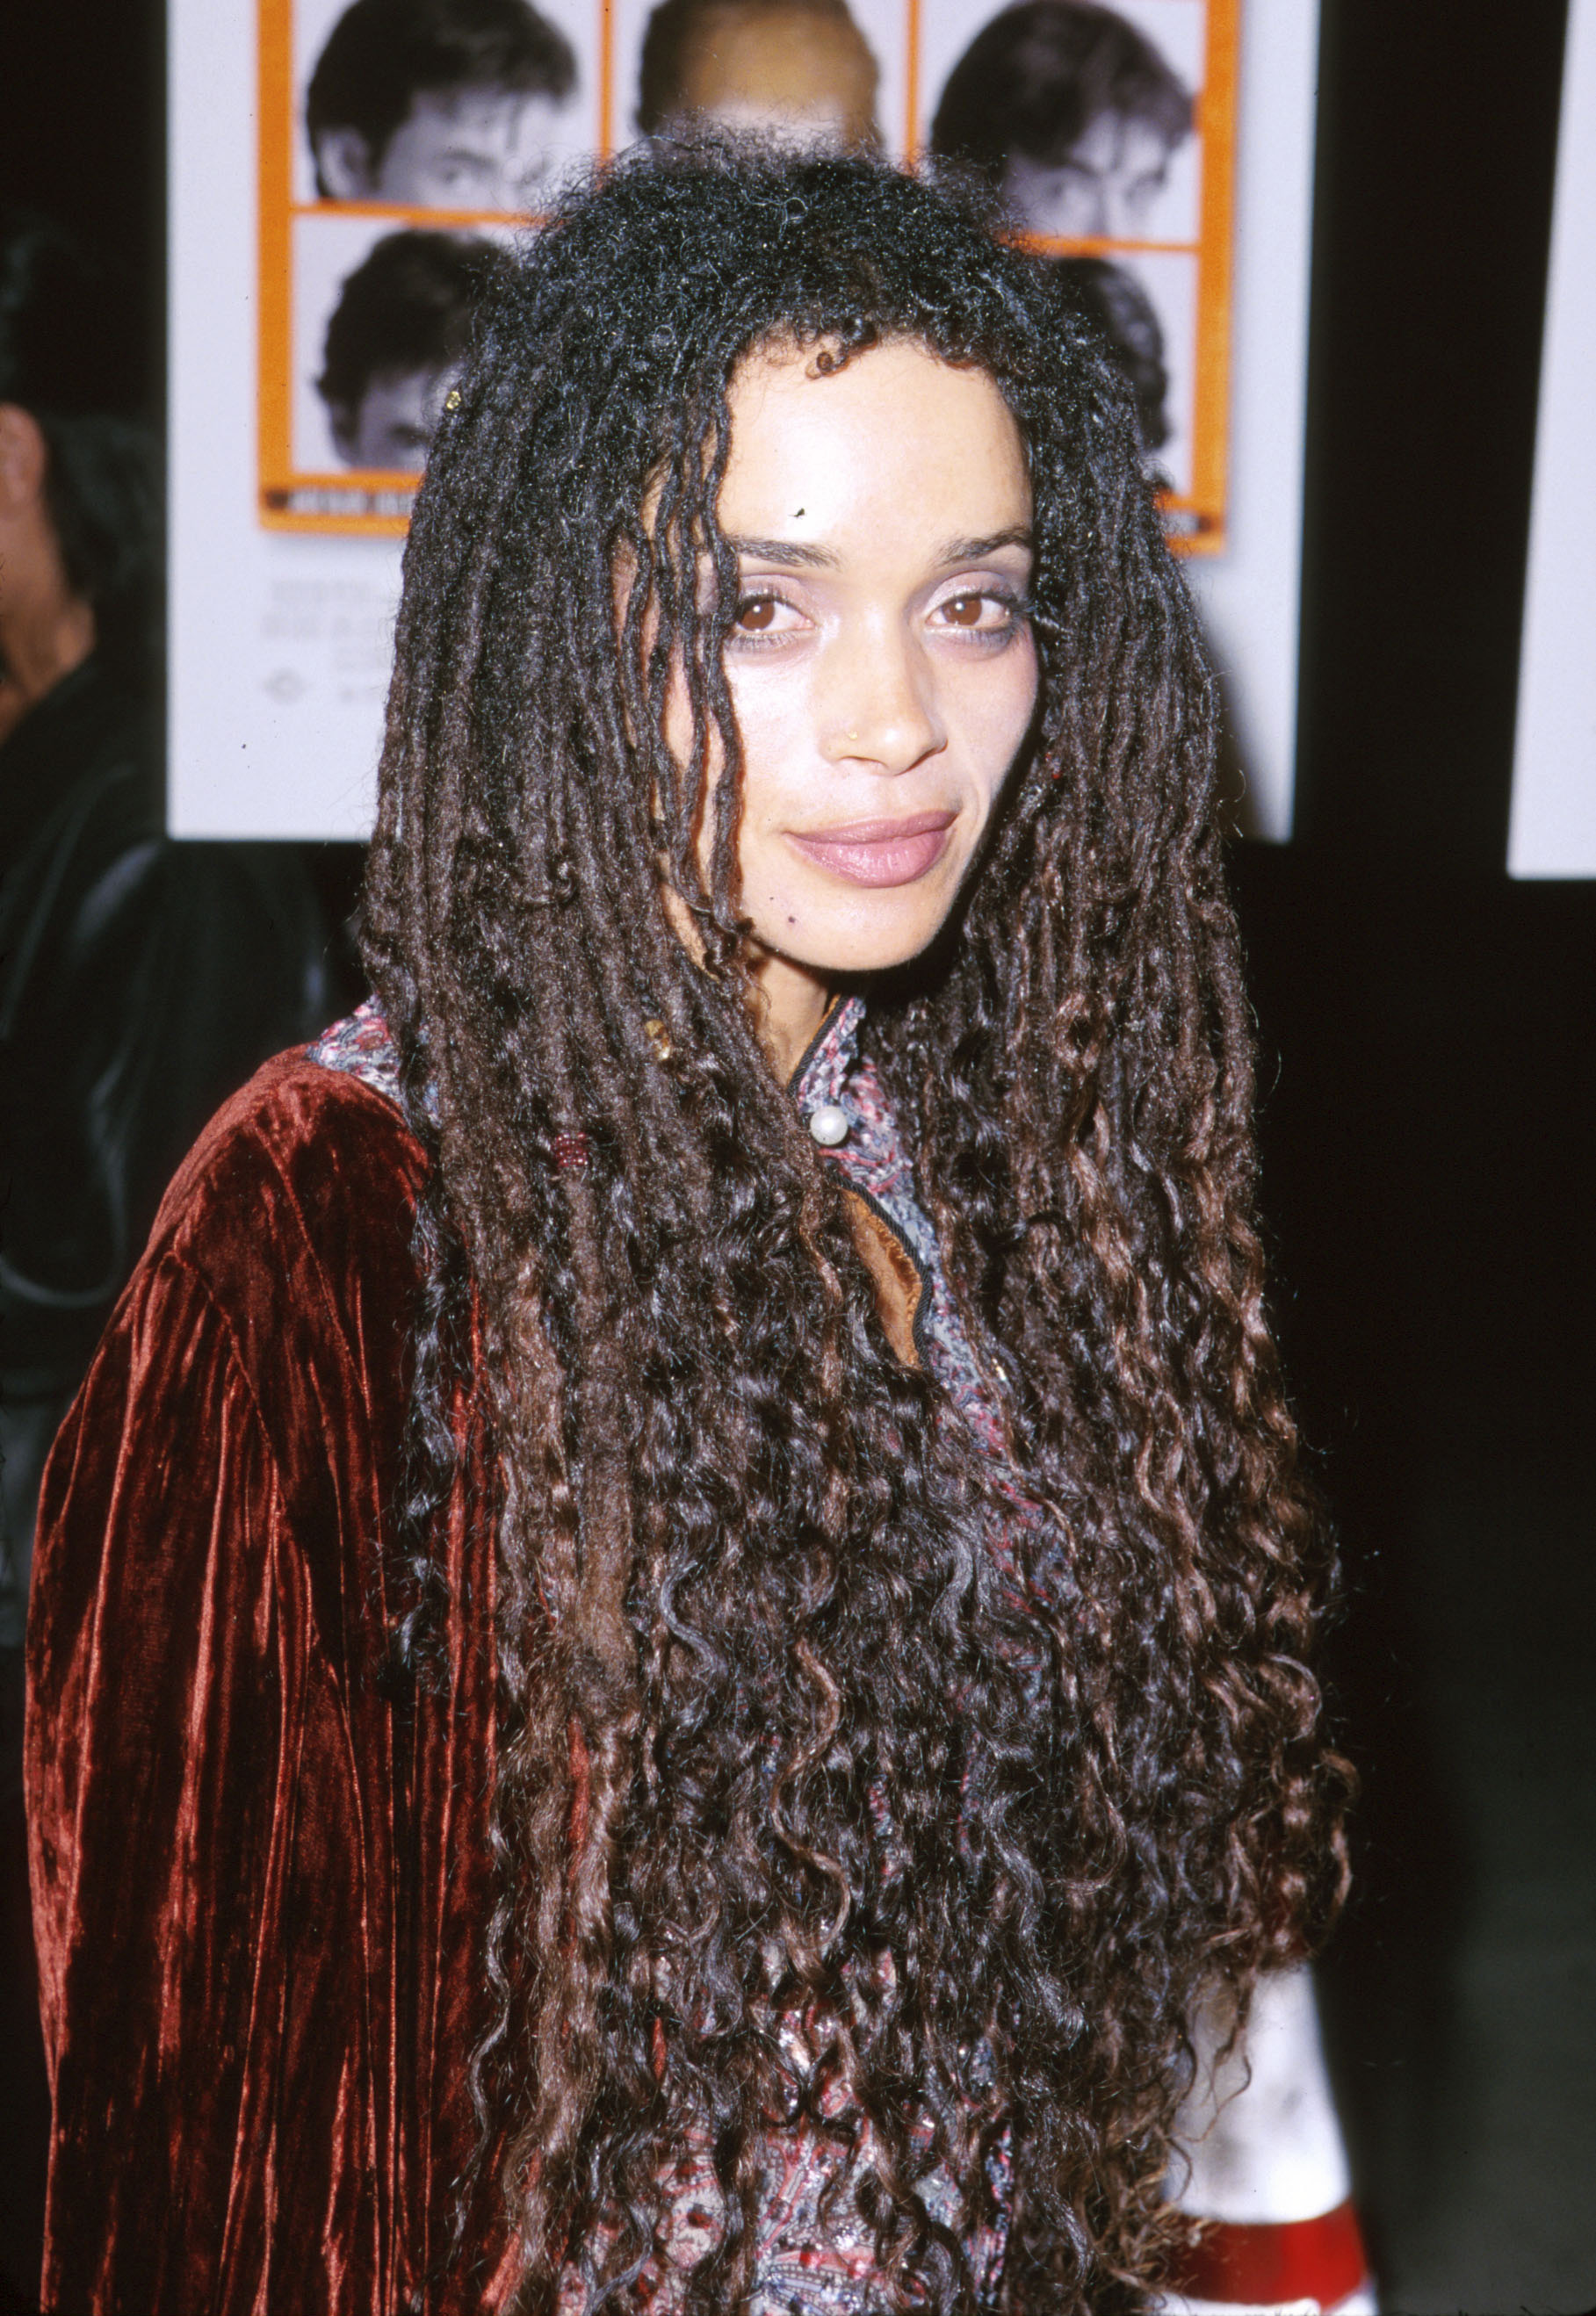 Lisa Bonet at "High Fidelity" Hollywood premiere in May 2008 | Source: Getty Images